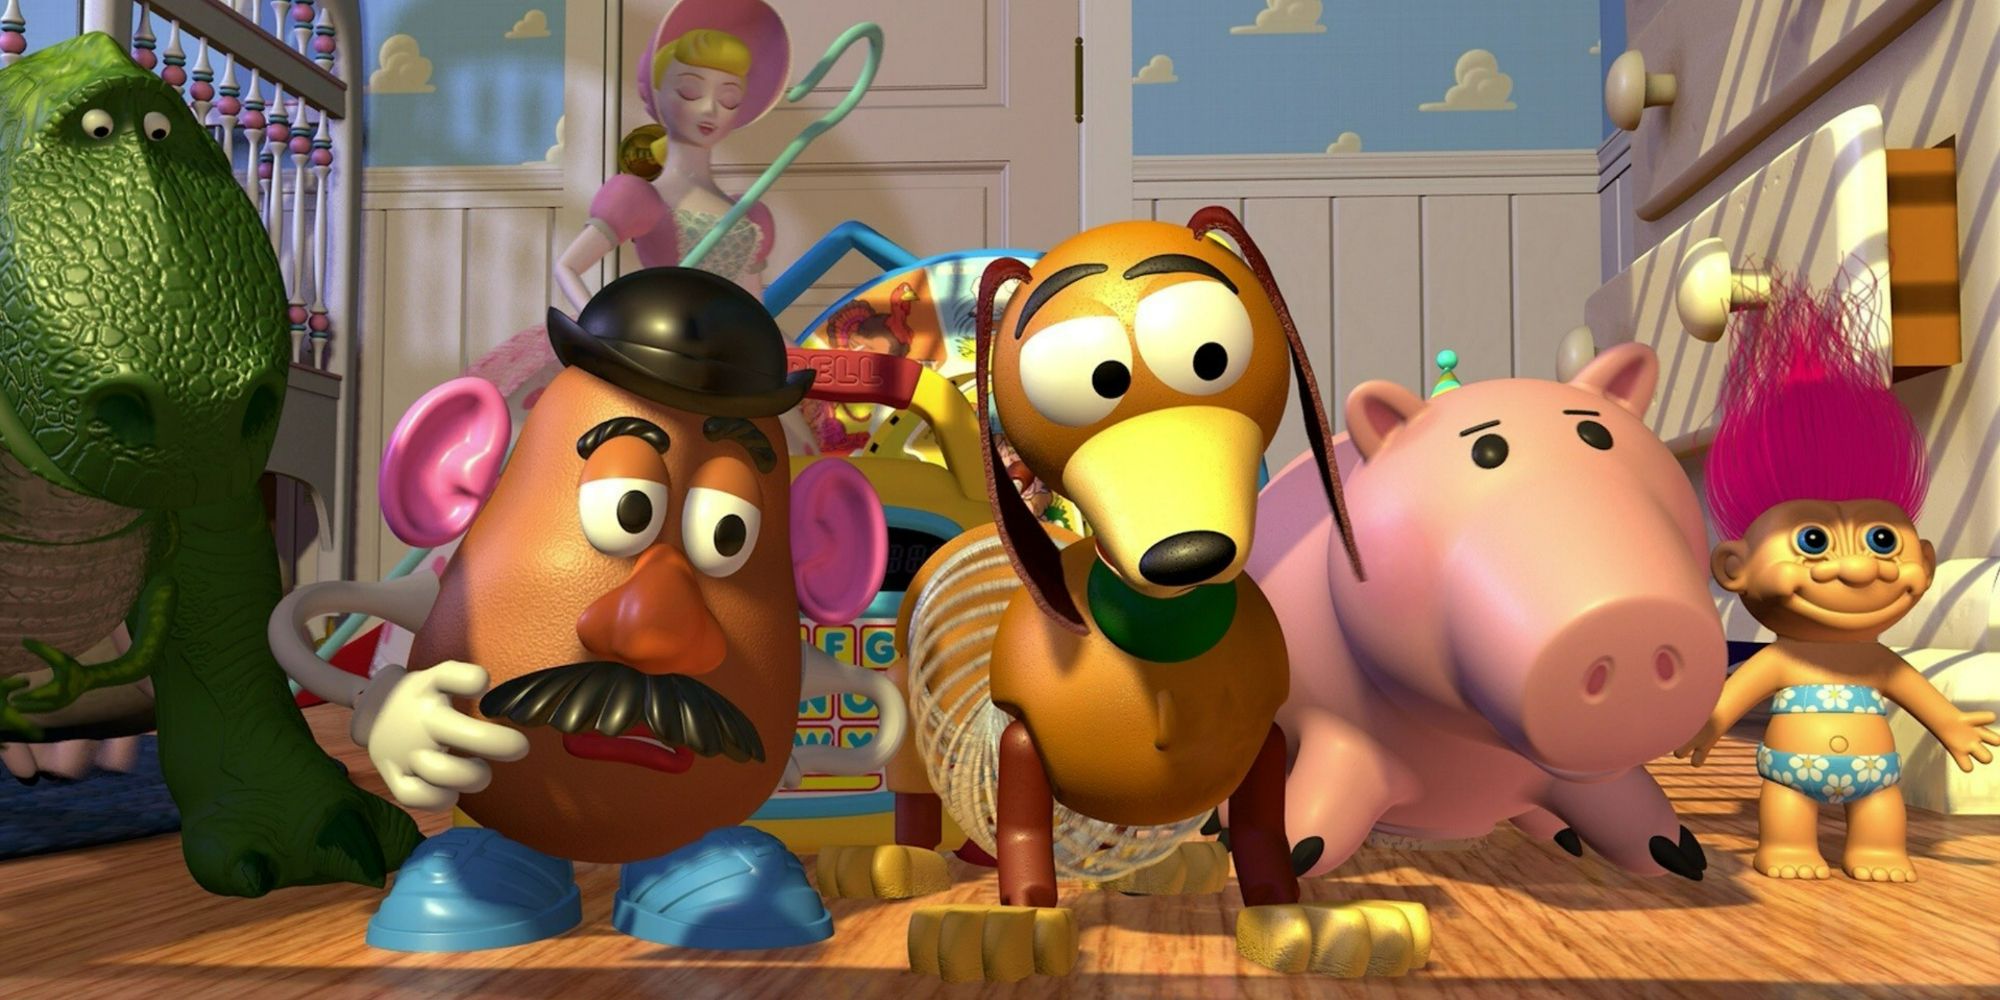 Rex, Potato Head and other toys from Pixar's first Toy Story